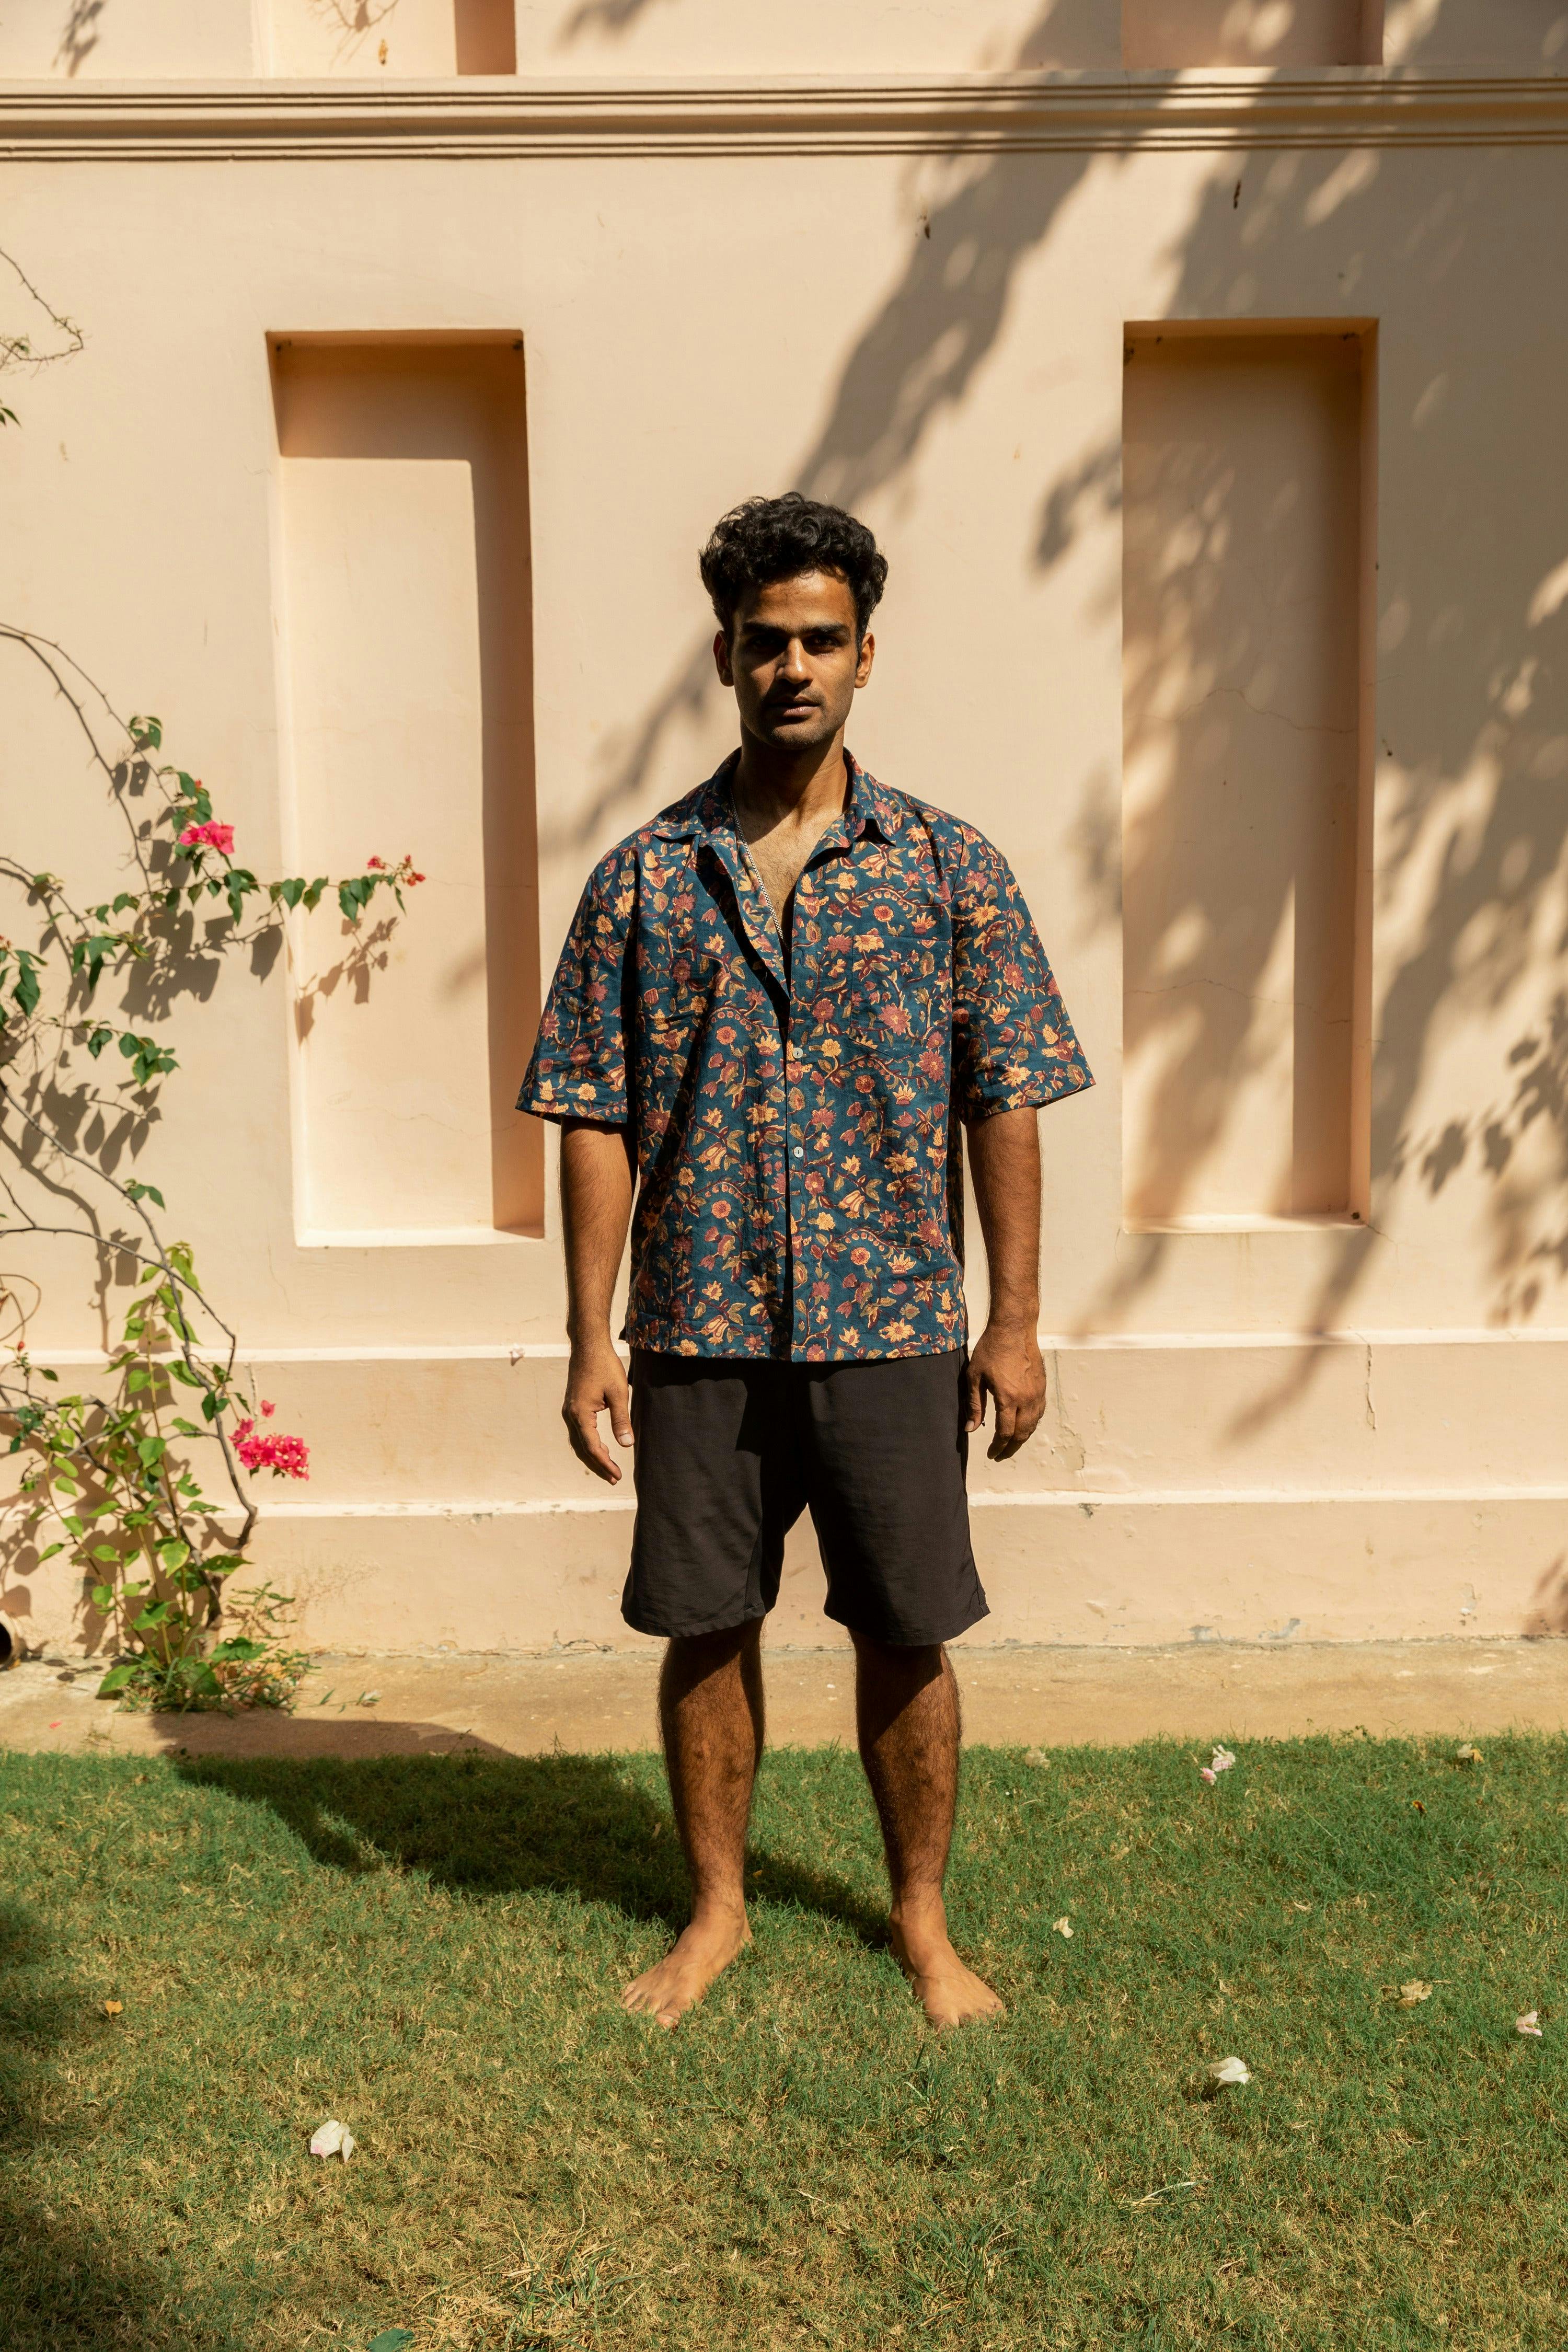 Hand Block Printed 100% Cotton Shirt - Moss, a product by izsi